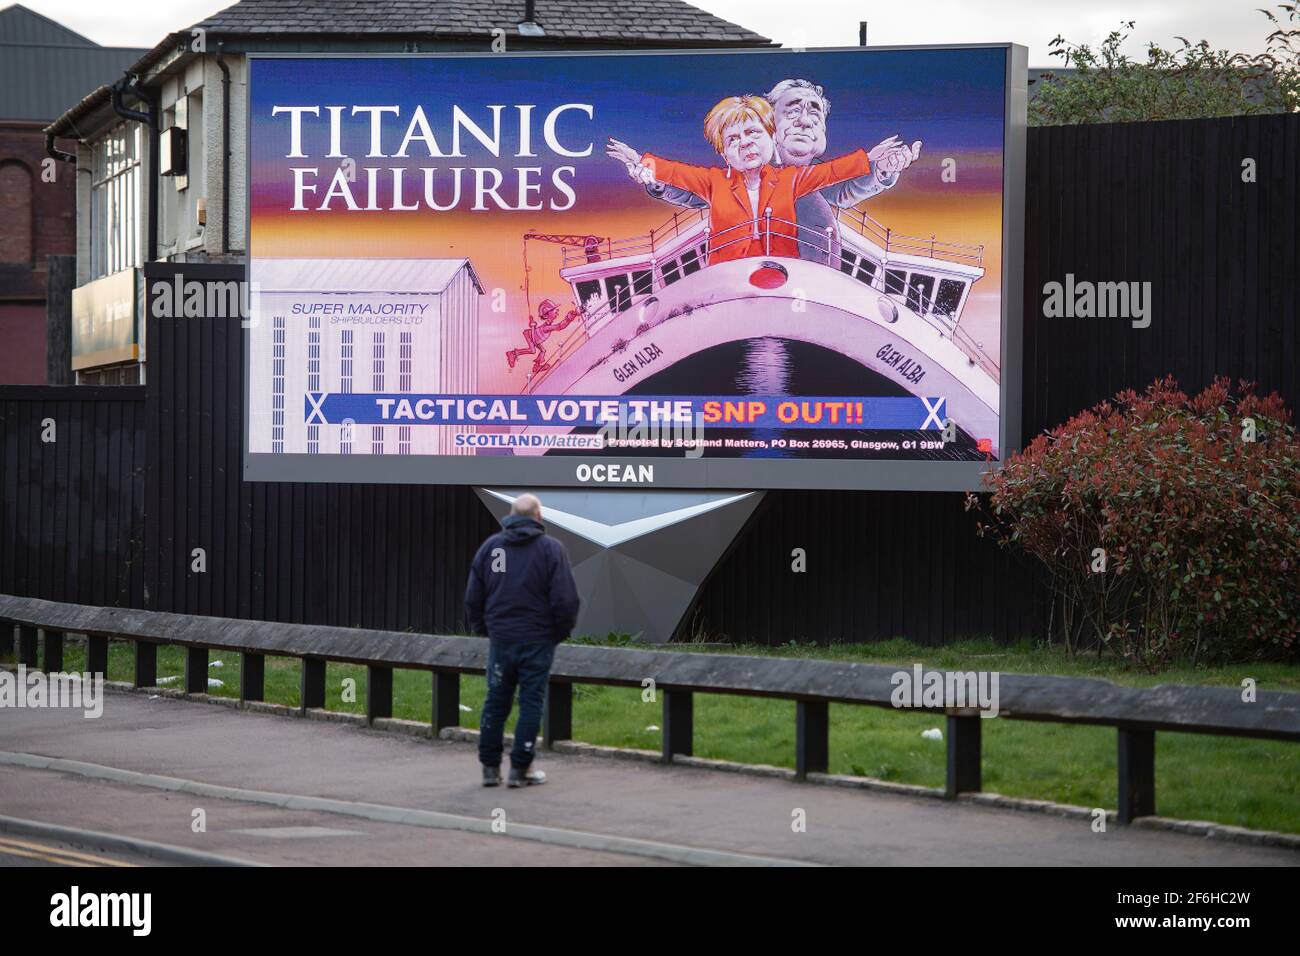 Glasgow, Scotland, UK. 1st Apr, 2021. PICTURED: A giant electronic billboard displaying an artwork graphic with the title, “TITANIC FAILURES” and “TACTICAL VOTEE THE SNP OUT” with cartoon characters of Nicola Sturgeon and Alex Salmond re-enacting the famous scene from the titanic at the bow, but its on the Glen Alba ferry instead. Press release link: https://www.scotlandmatters.co.uk/titanicfailurebillboard/ Article Link: https://www.bbc.co.uk/news/amp/uk-scotland-glasgow-west-56579158?  twitter impression=true&s=03 Credit: Colin Fisher/Alamy Live News Stock Photo